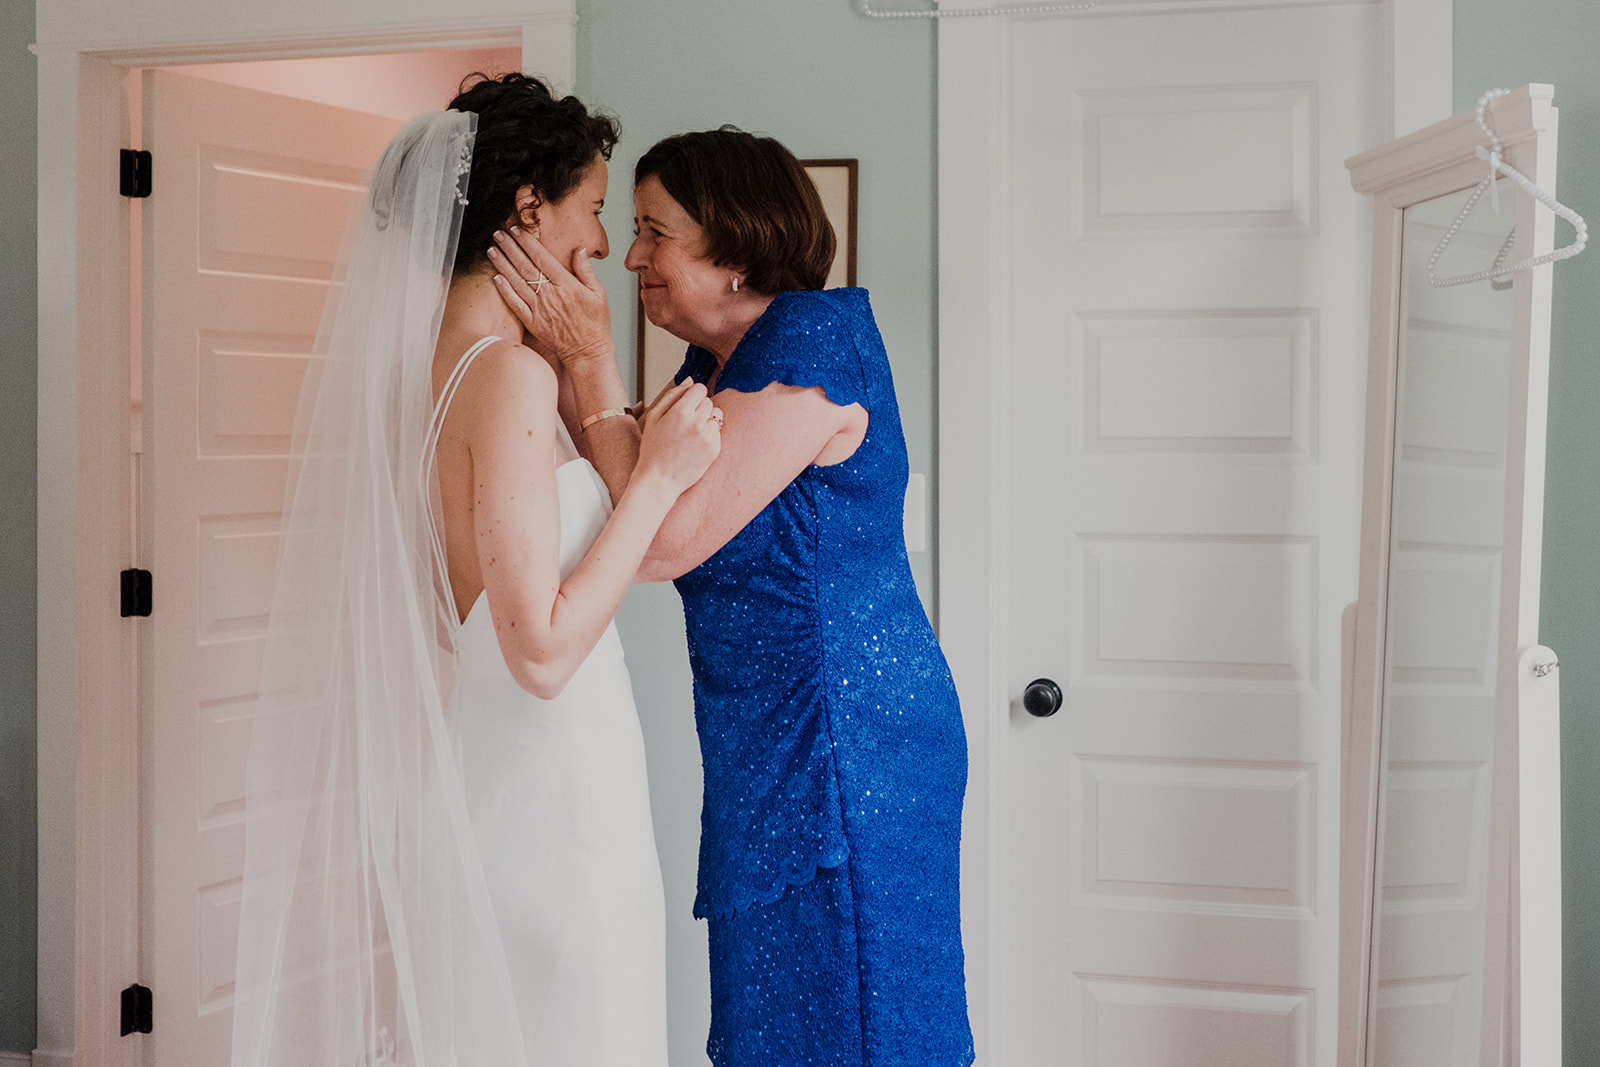 The mother of the bride holds her daughter's face in her hands on her wedding day at Blue Hill Farm in Waterford, VA.